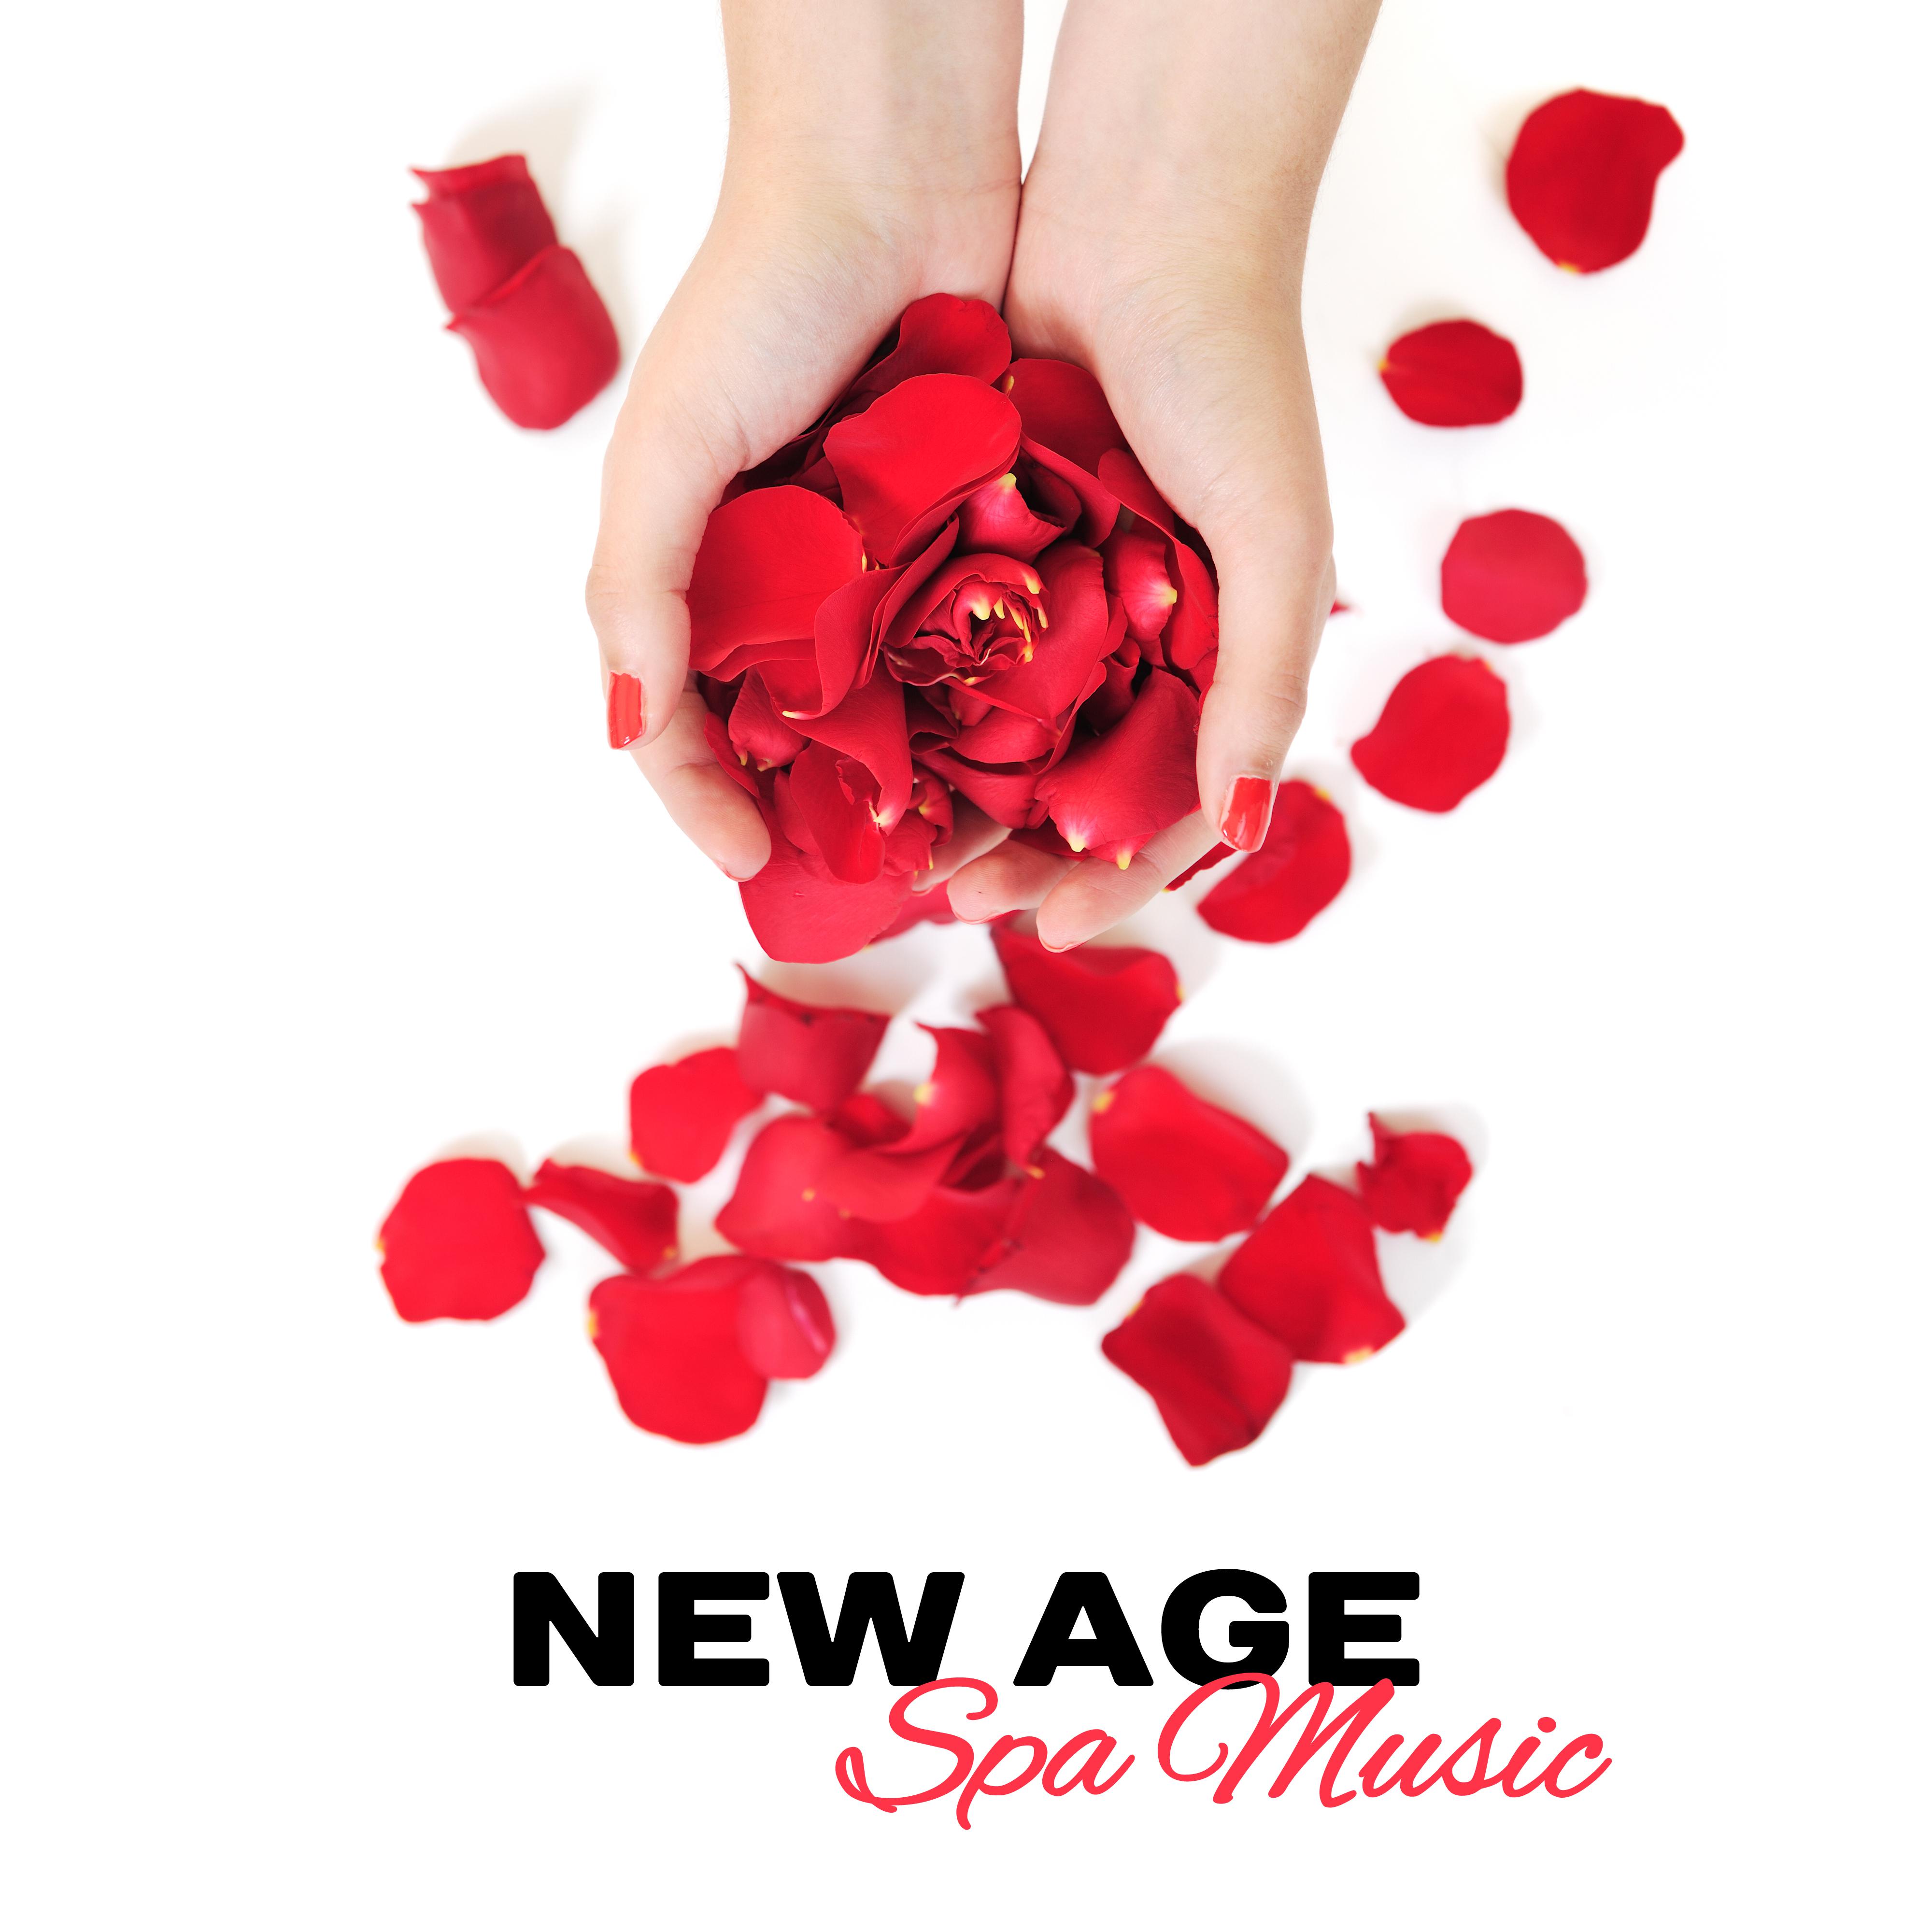 New Age Spa Music  Peaceful Sounds for Relaxation, Wellness, Spa, Healing Massage, Soft Nature Sounds to Rest, Bliss Spa